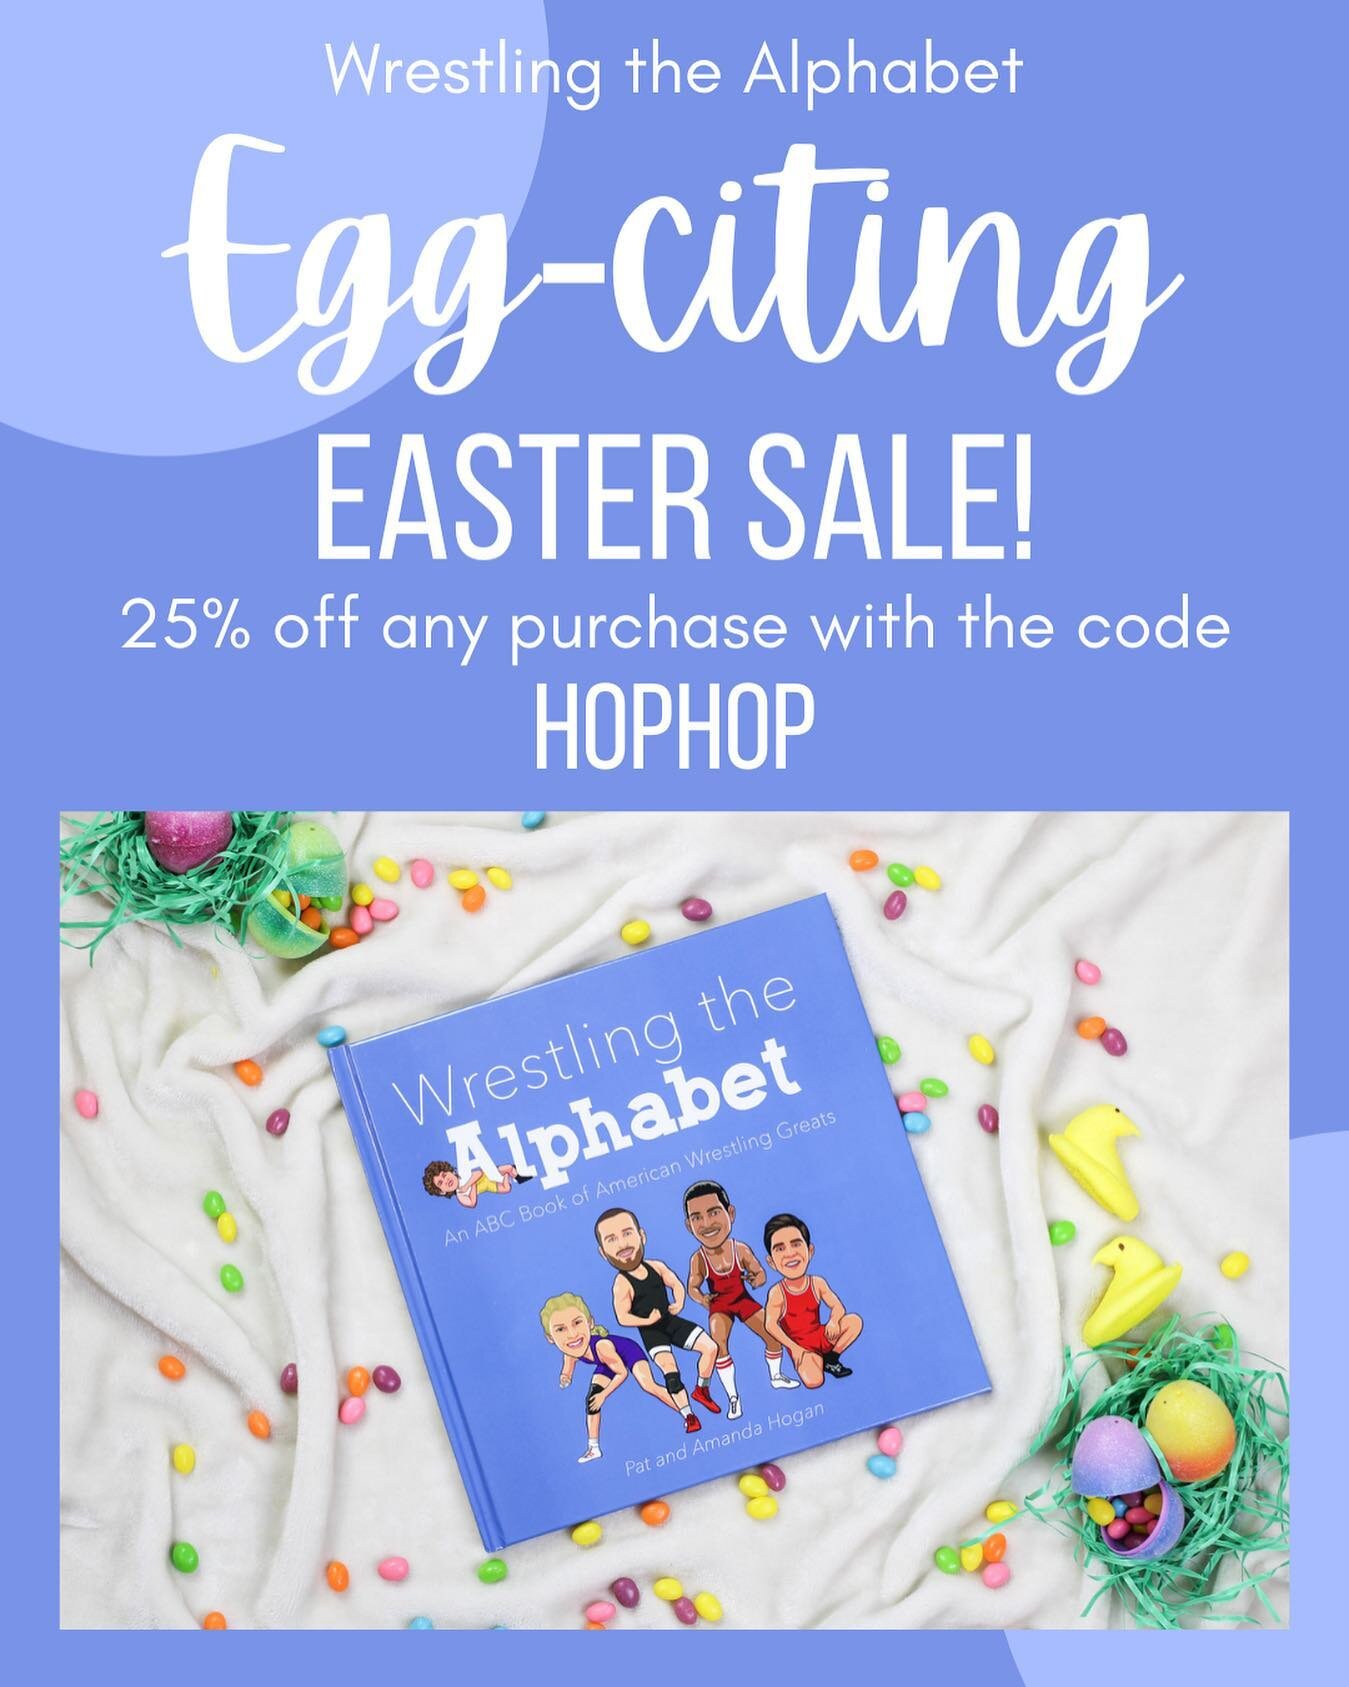 Wrestling the Alphabet is a great addition to any wrestler&rsquo;s Easter basket! Hop on over for our egg-citing Easter sale!

25% OFF ANY PURCHASE WITH THE CODE HOPHOP 🐣